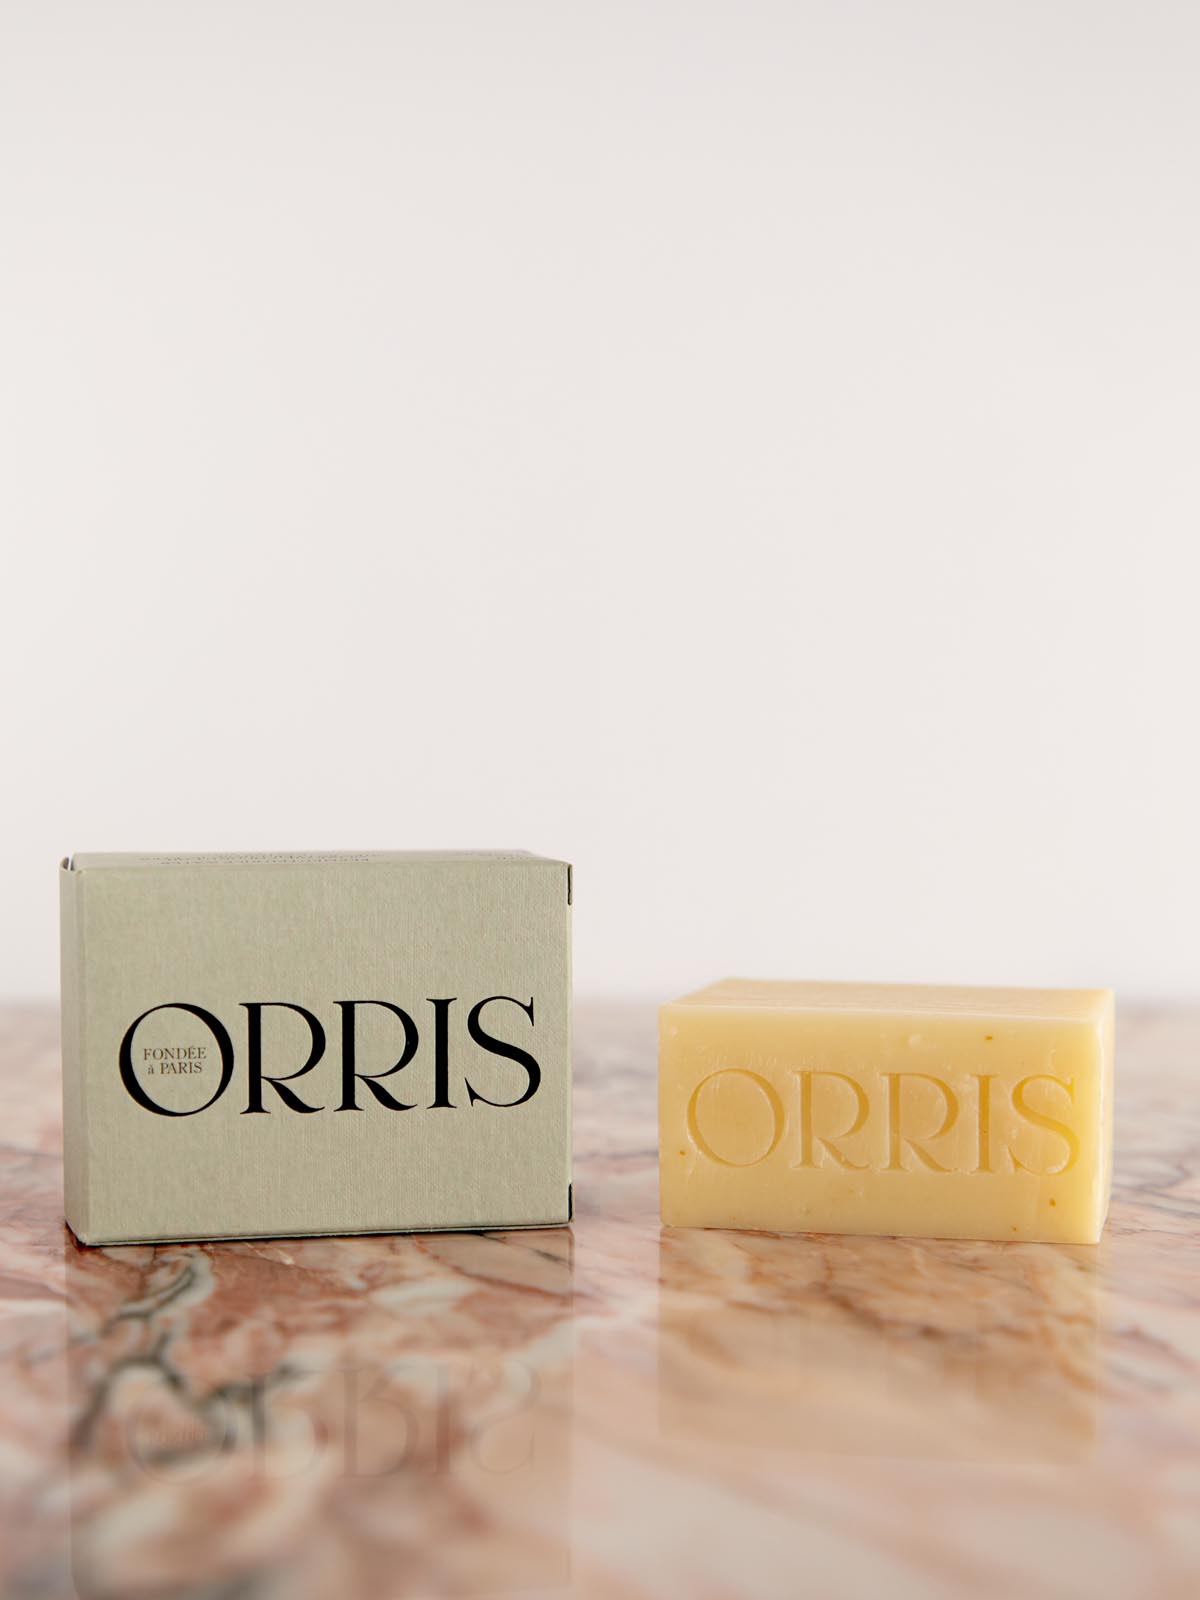 Le Soliste- Cleansing Bar by Orris box and soap on pink marble